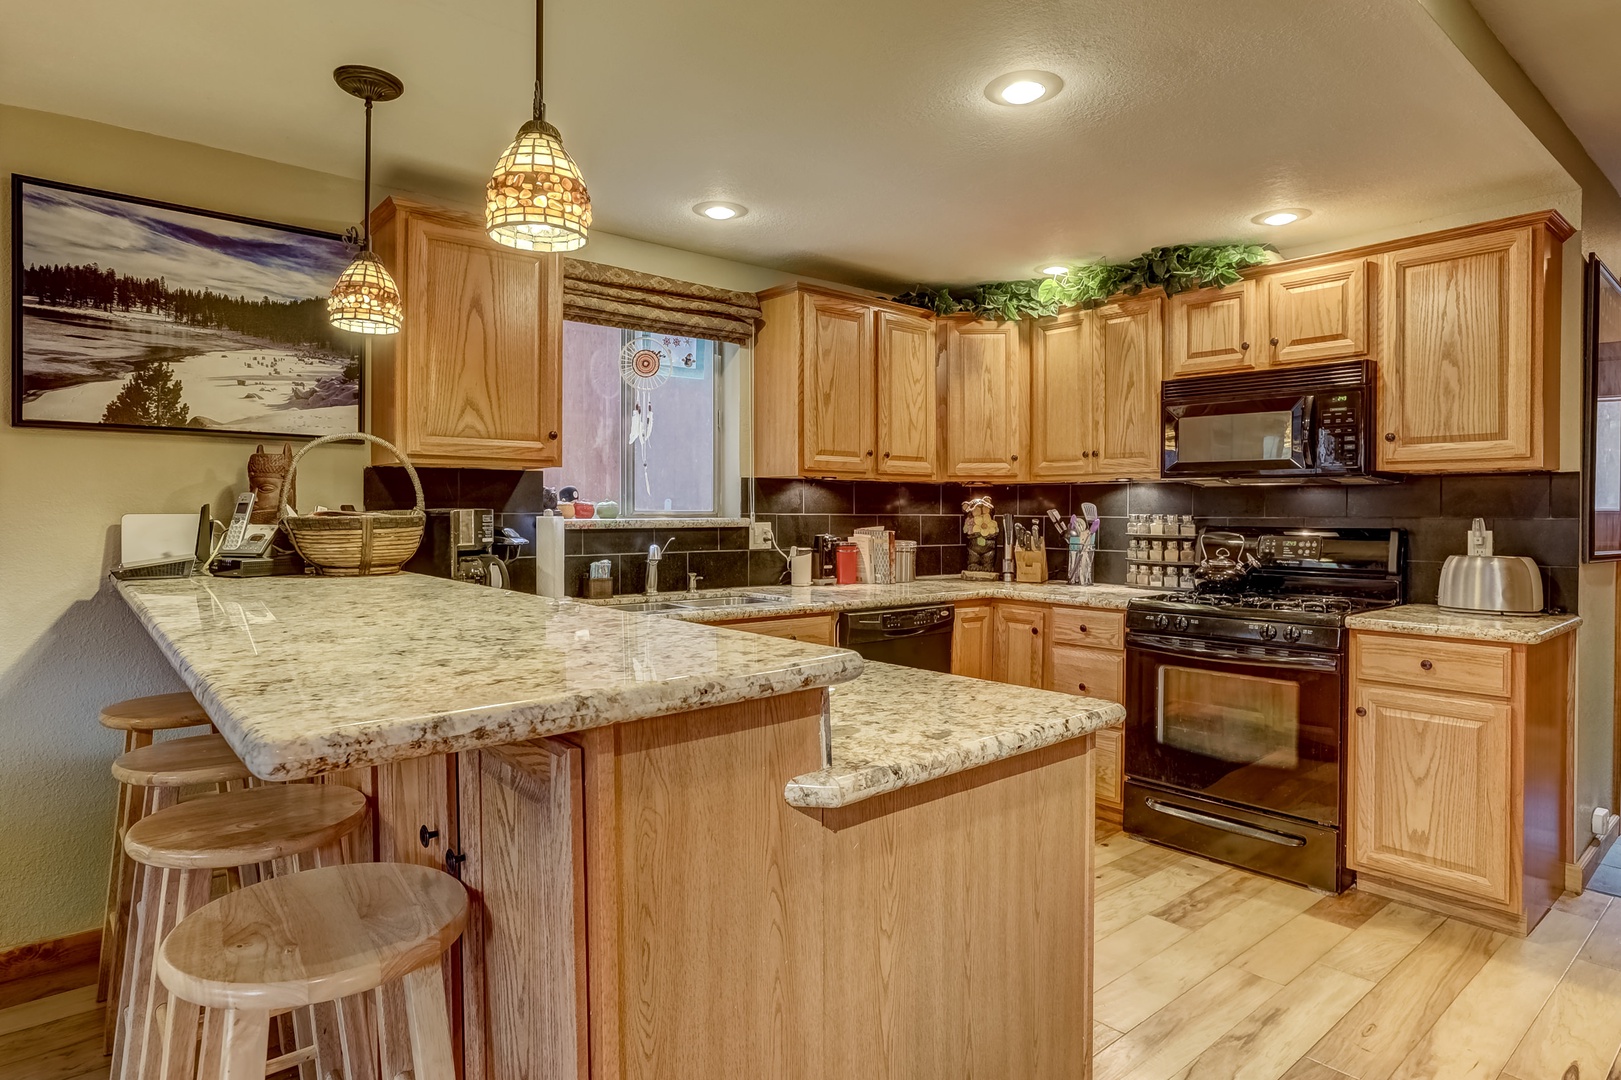 Kitchen with drip coffee maker, Keurig, toaster, and more